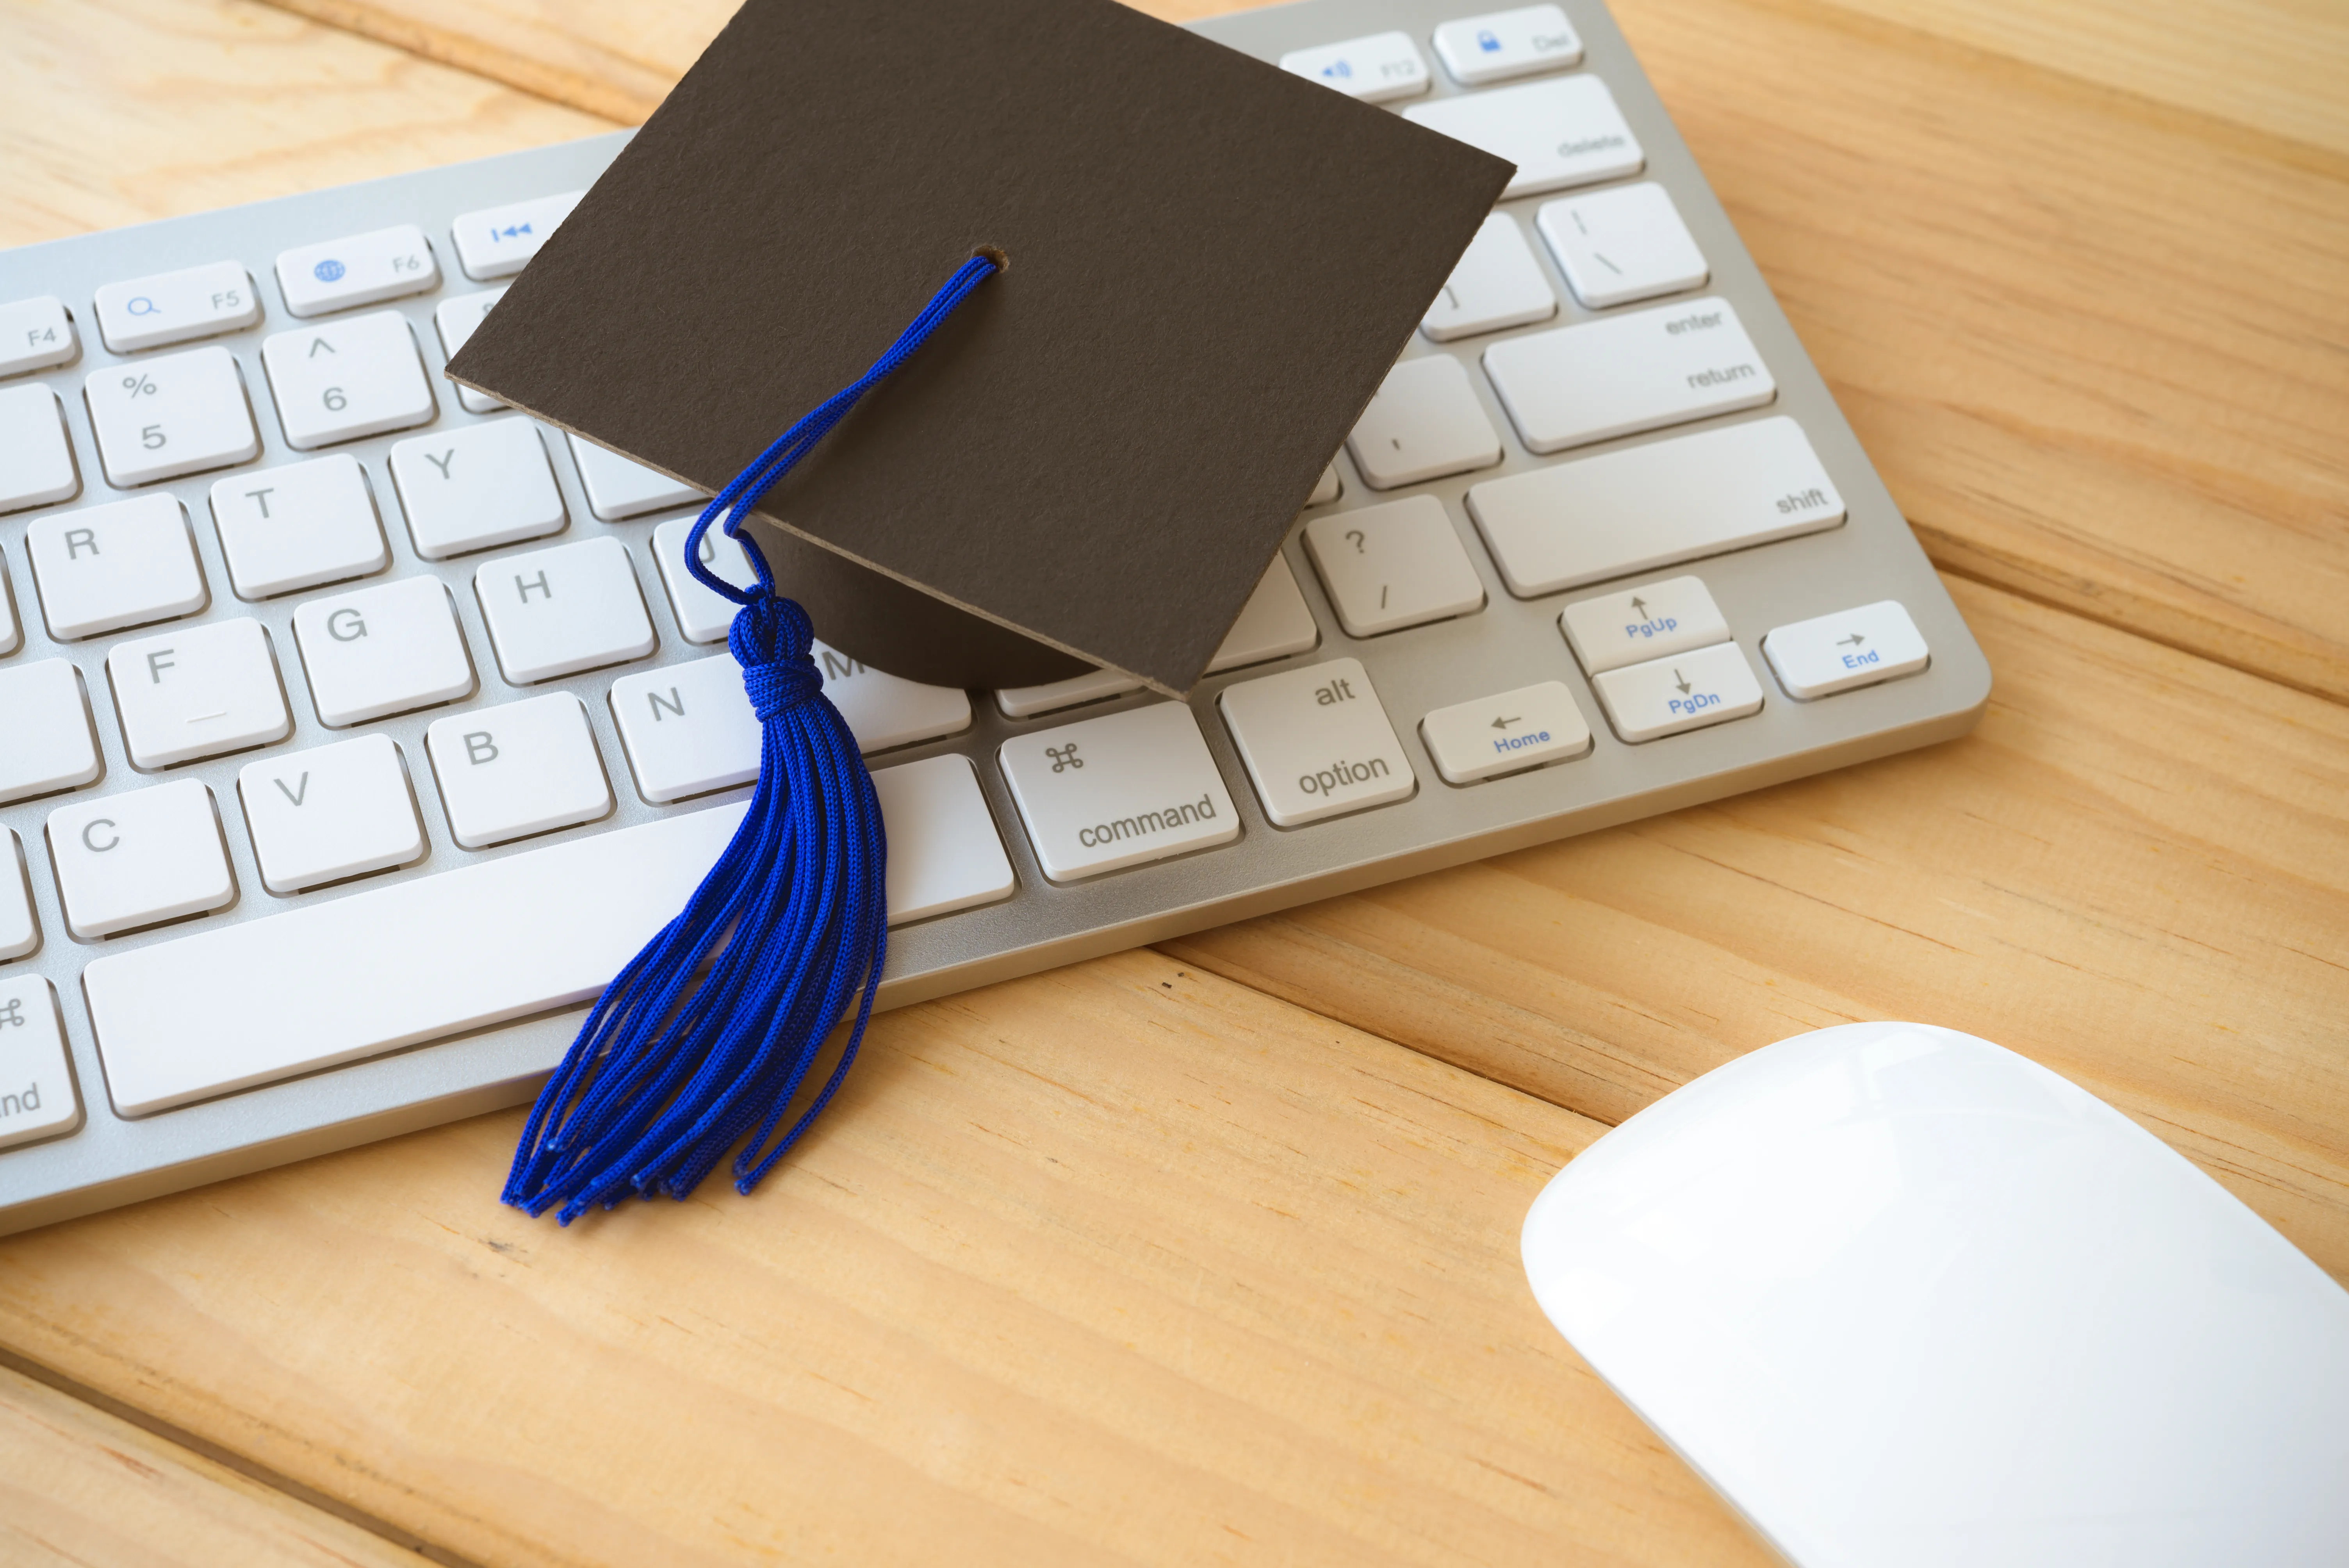 Why More People Than Ever Are Looking at Getting a Digital Marketing Degree